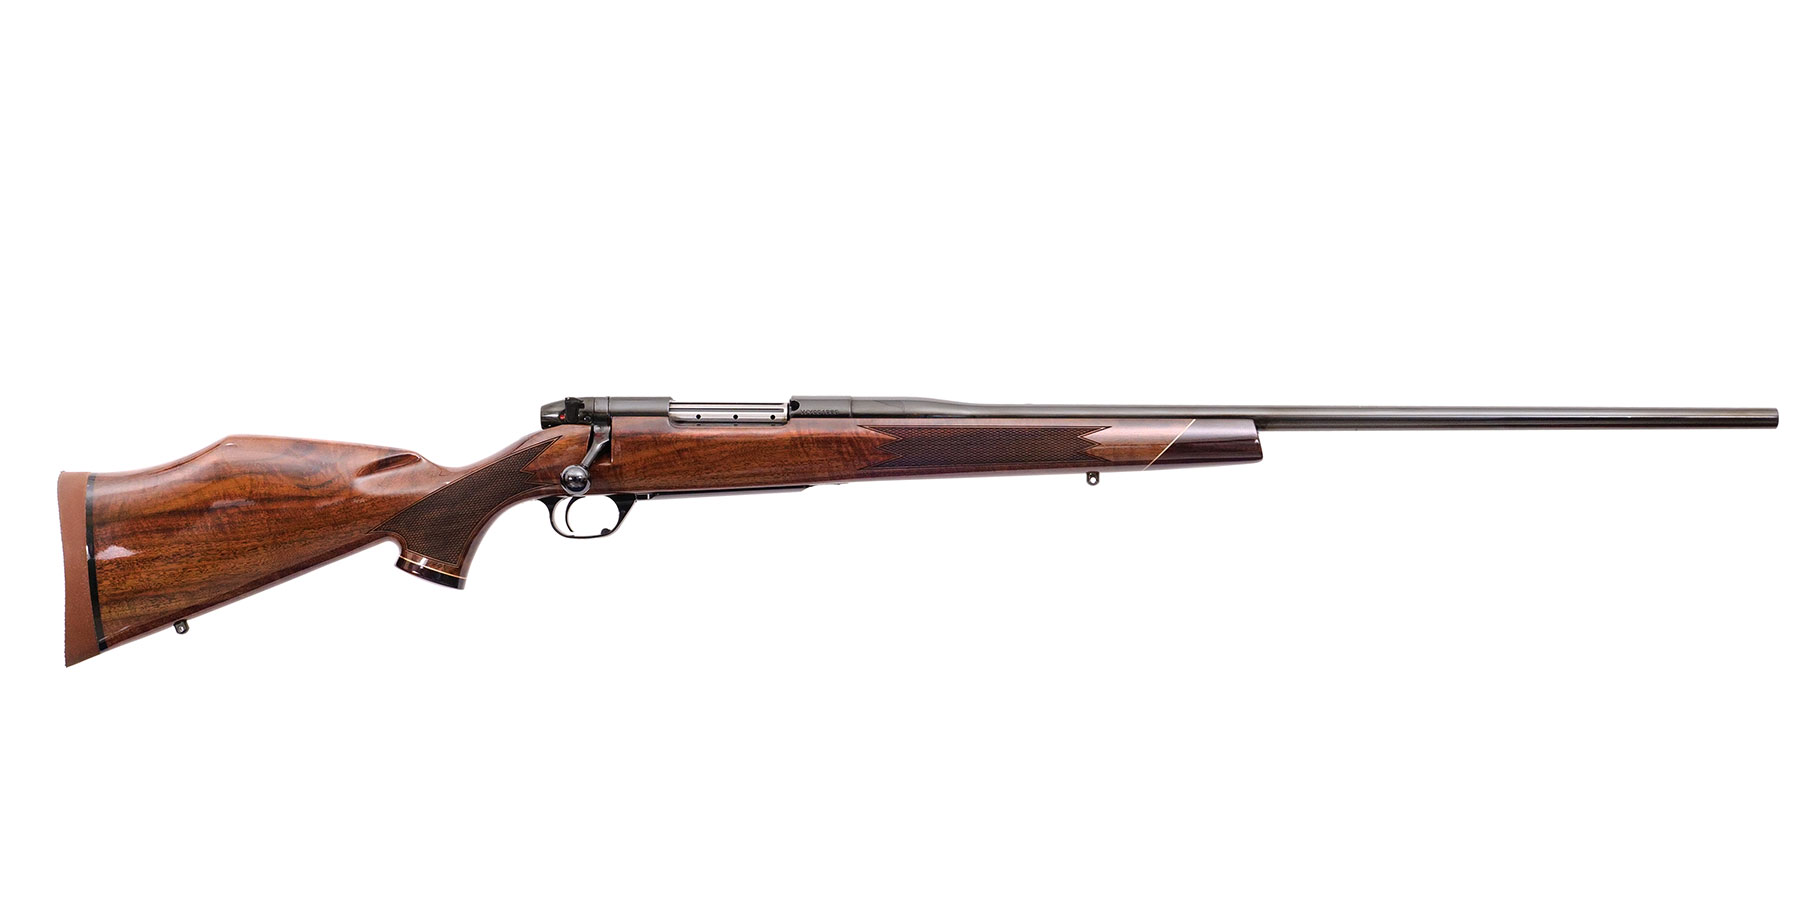 A Weatherby Mark V bolt-action rifle.